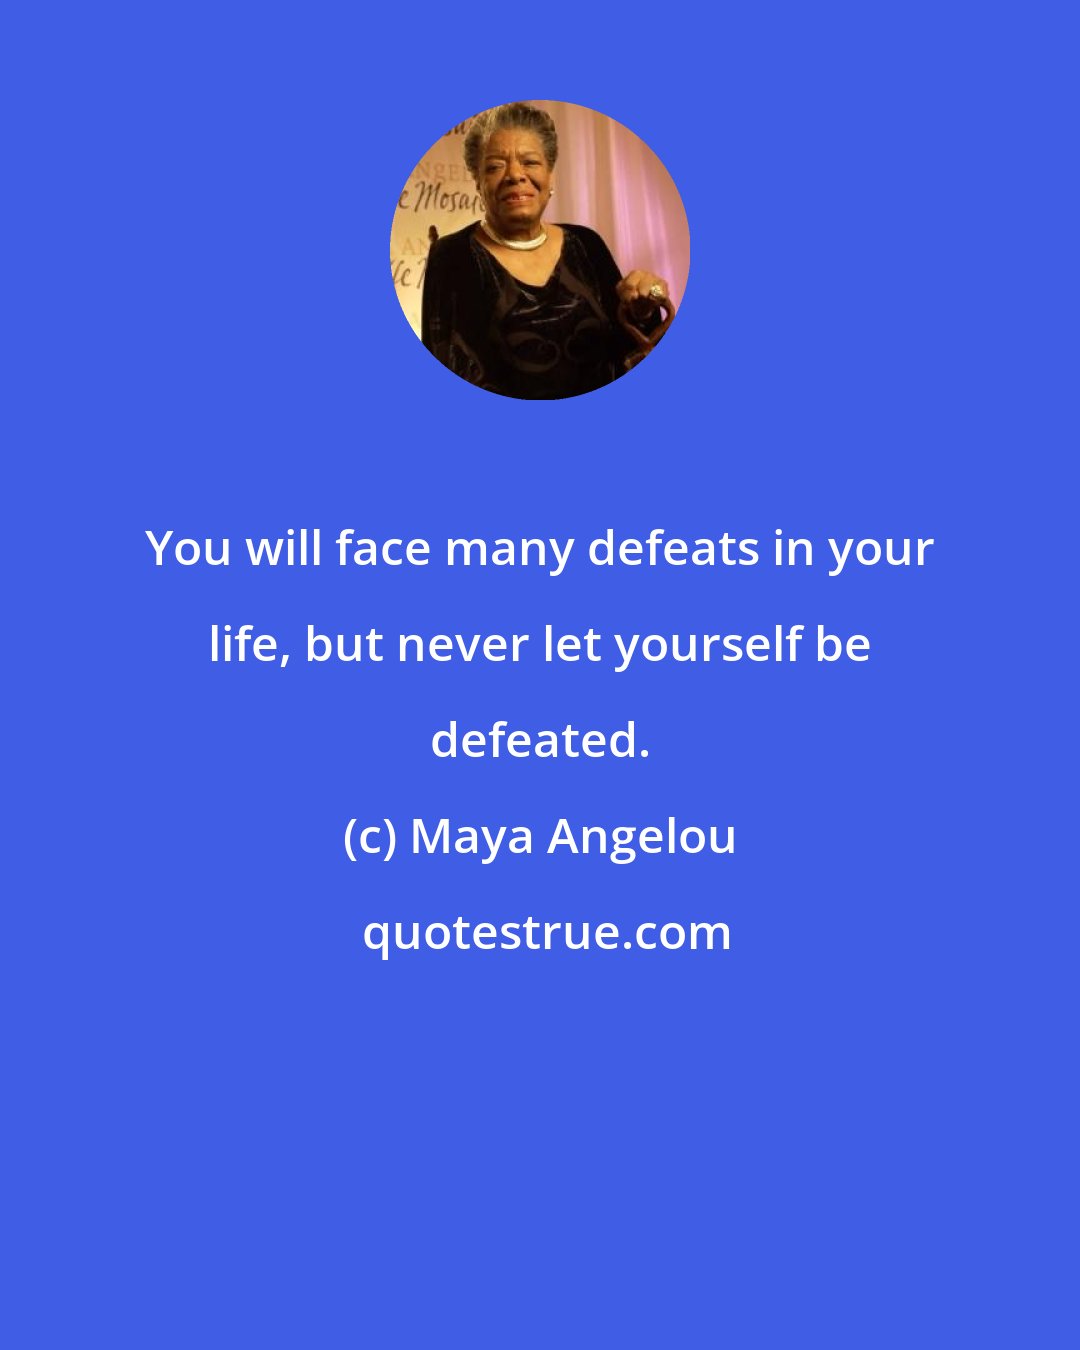 Maya Angelou: You will face many defeats in your life, but never let yourself be defeated.